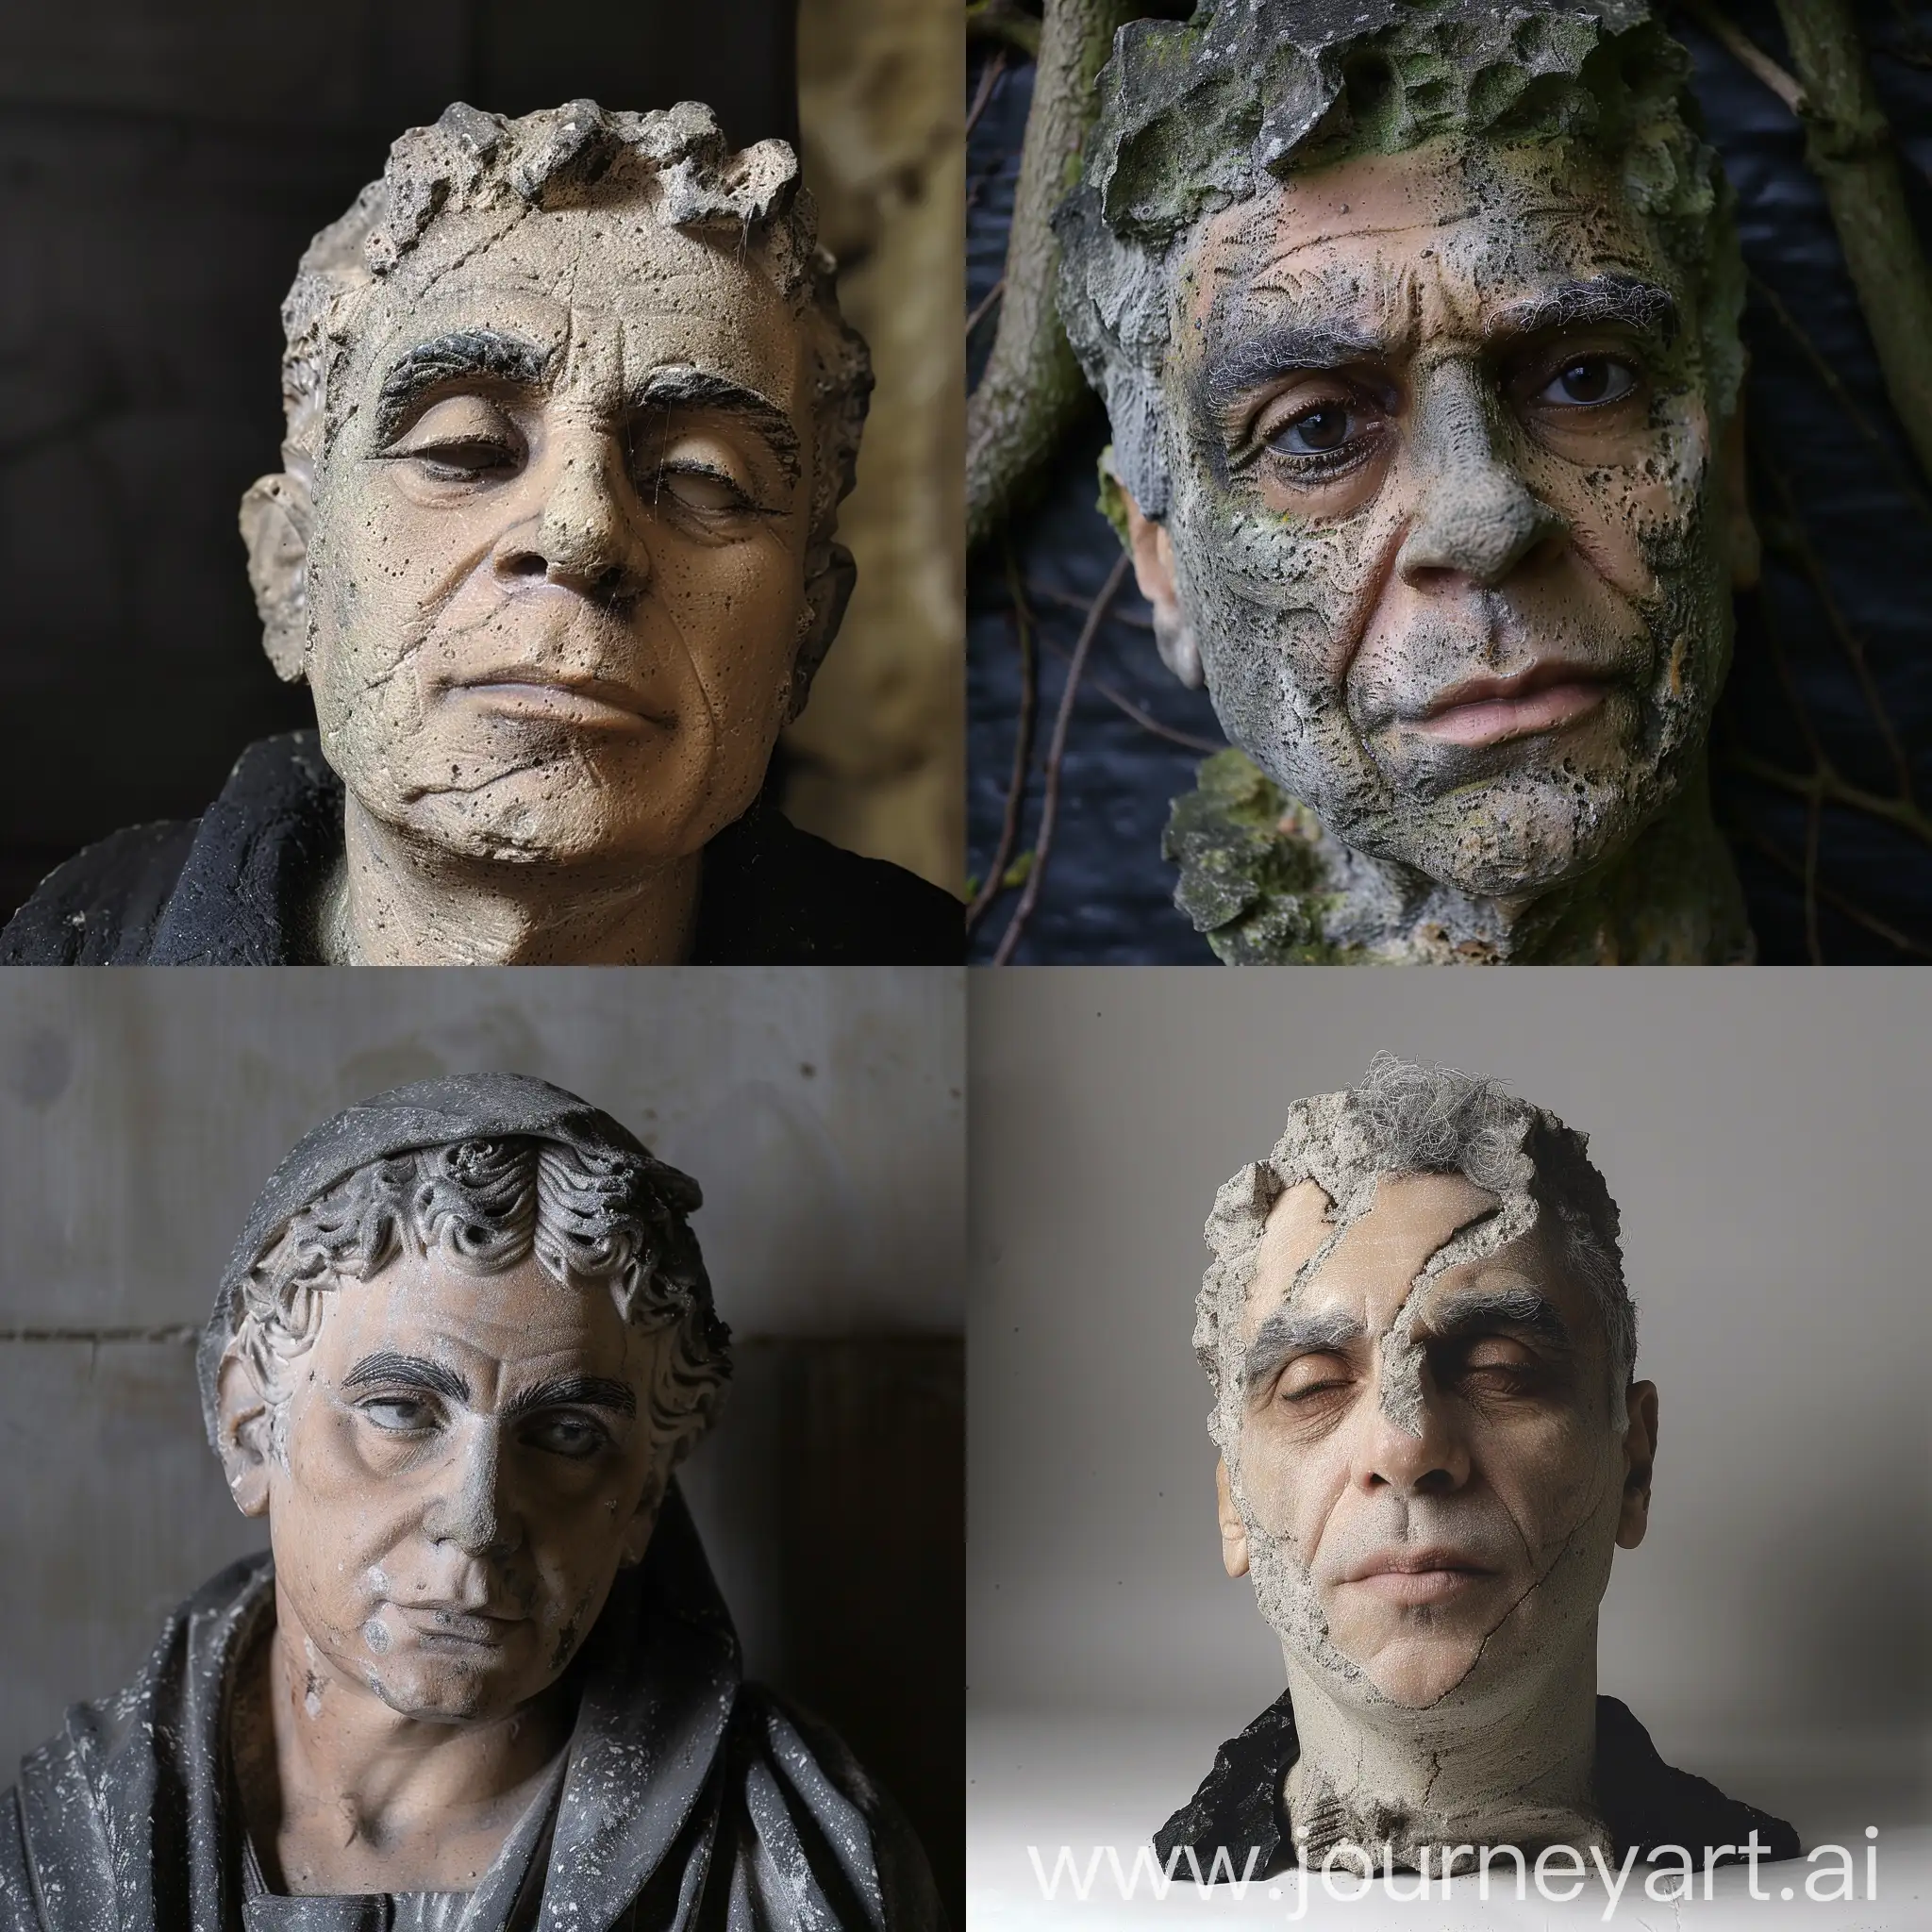 Man-Transformed-into-Stone-Statue-Mysterious-Ancient-Art